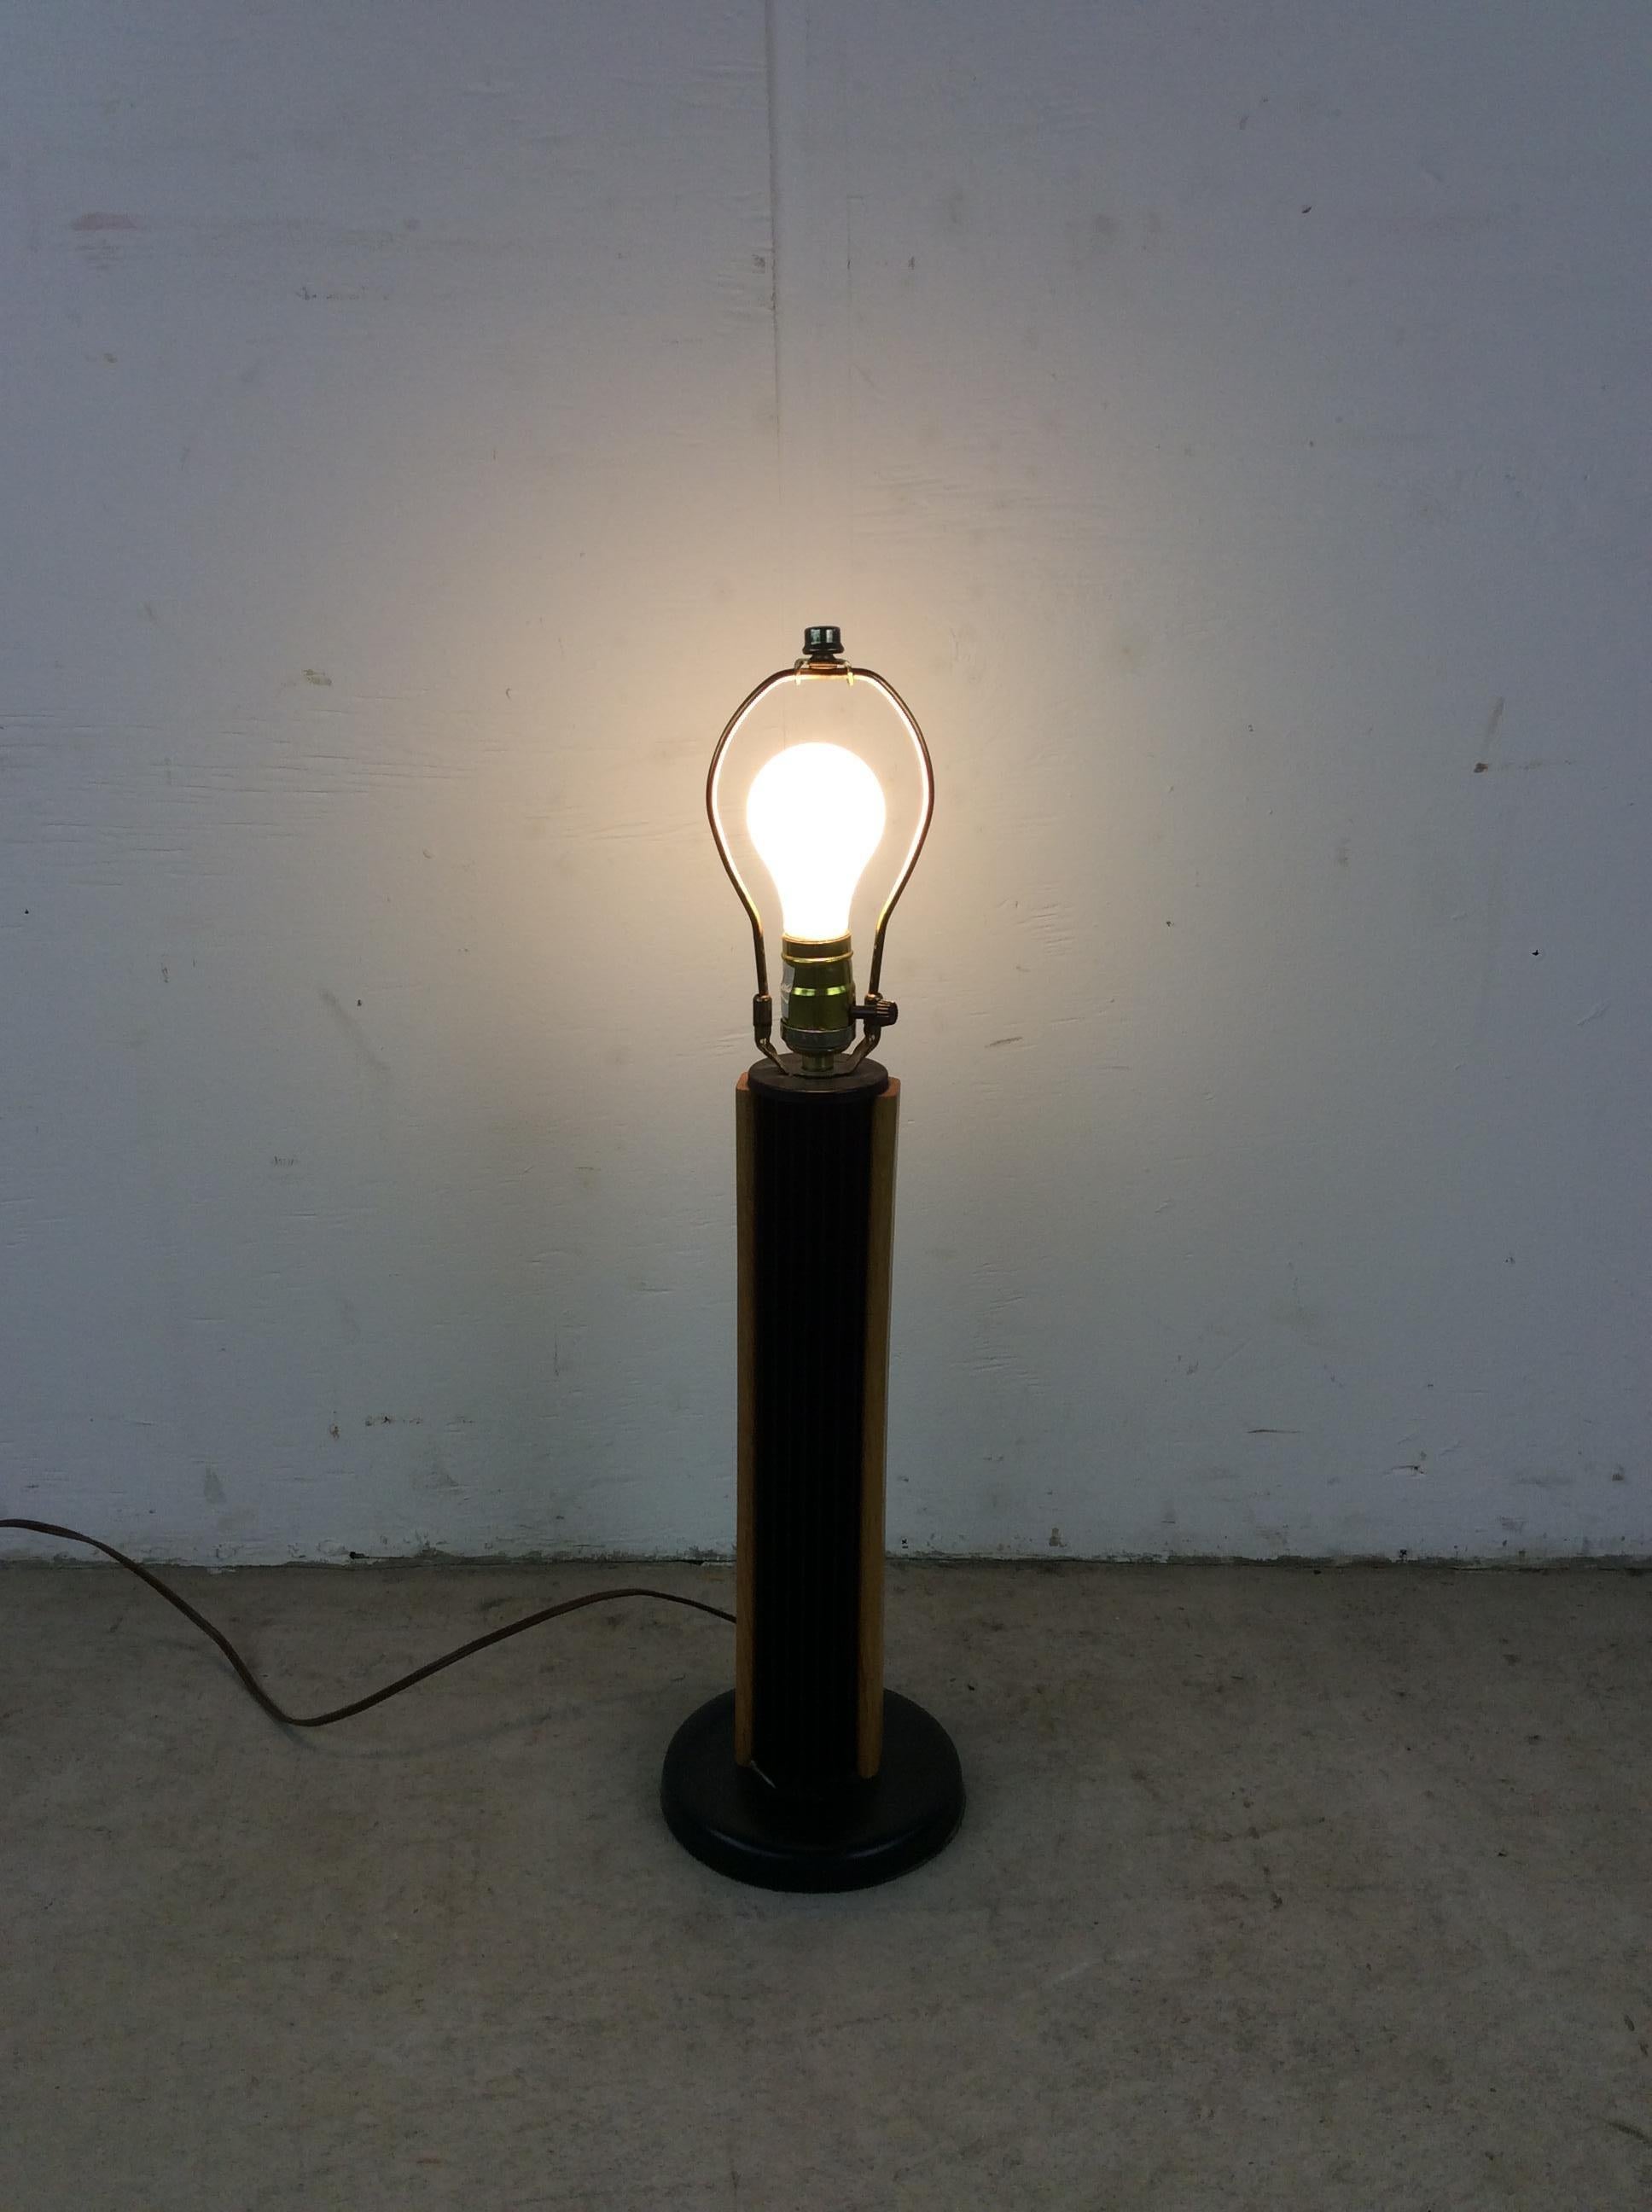 This vintage postmodern table lamp features black metal base with teak wood accents, empire shade, and original vintage cord and wiring.

Dimensions: 18w 18d 24h

Condition: Original finish on teak accents is in good condition. Only minor scuffs,